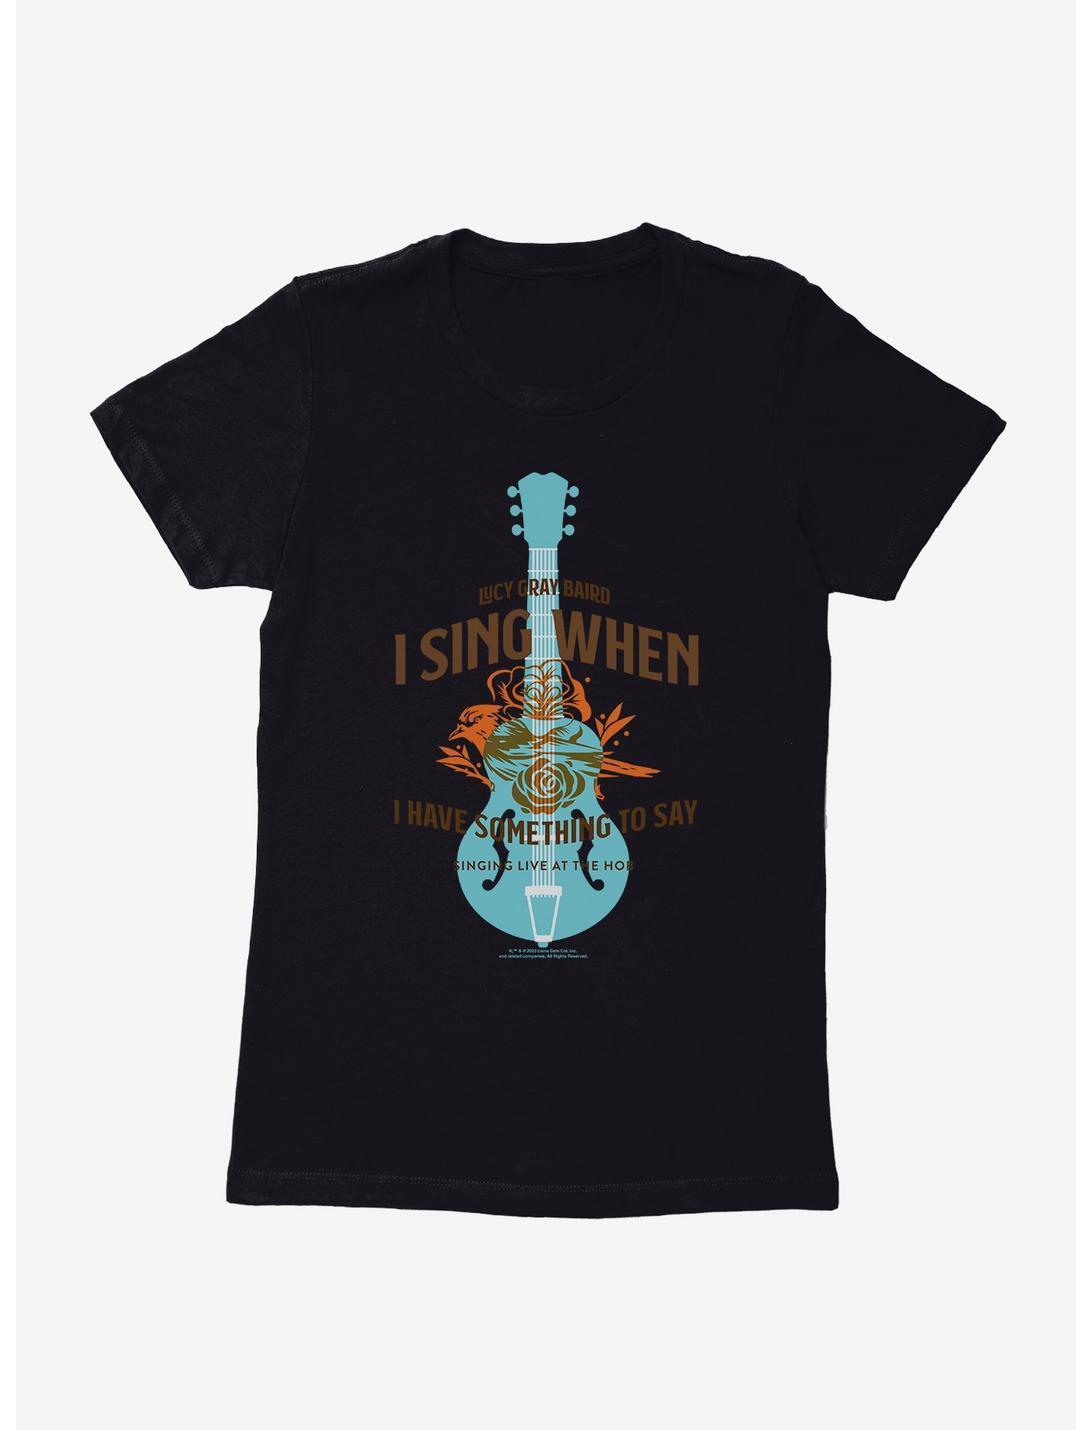 Hunger Games: The Ballad Of Songbirds And Snakes Lucy Gray Baird Guitar Womens T-Shirt, BLACK, hi-res